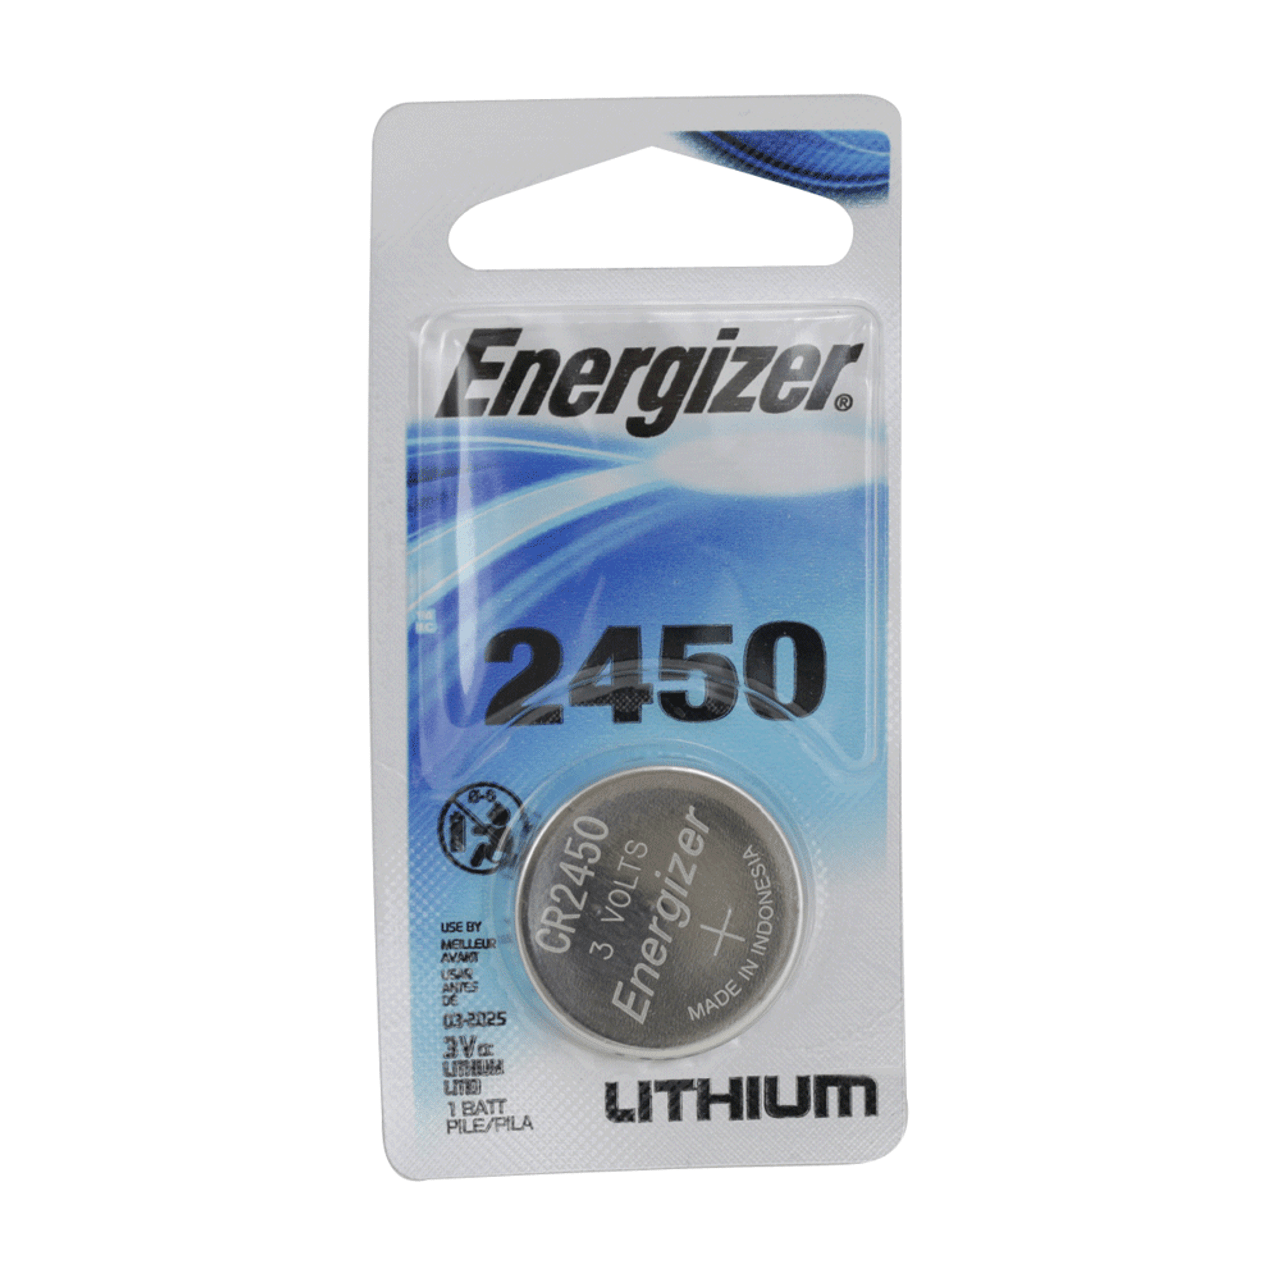 Energizer 2450 3 Volt Lithium Coin Battery Pack